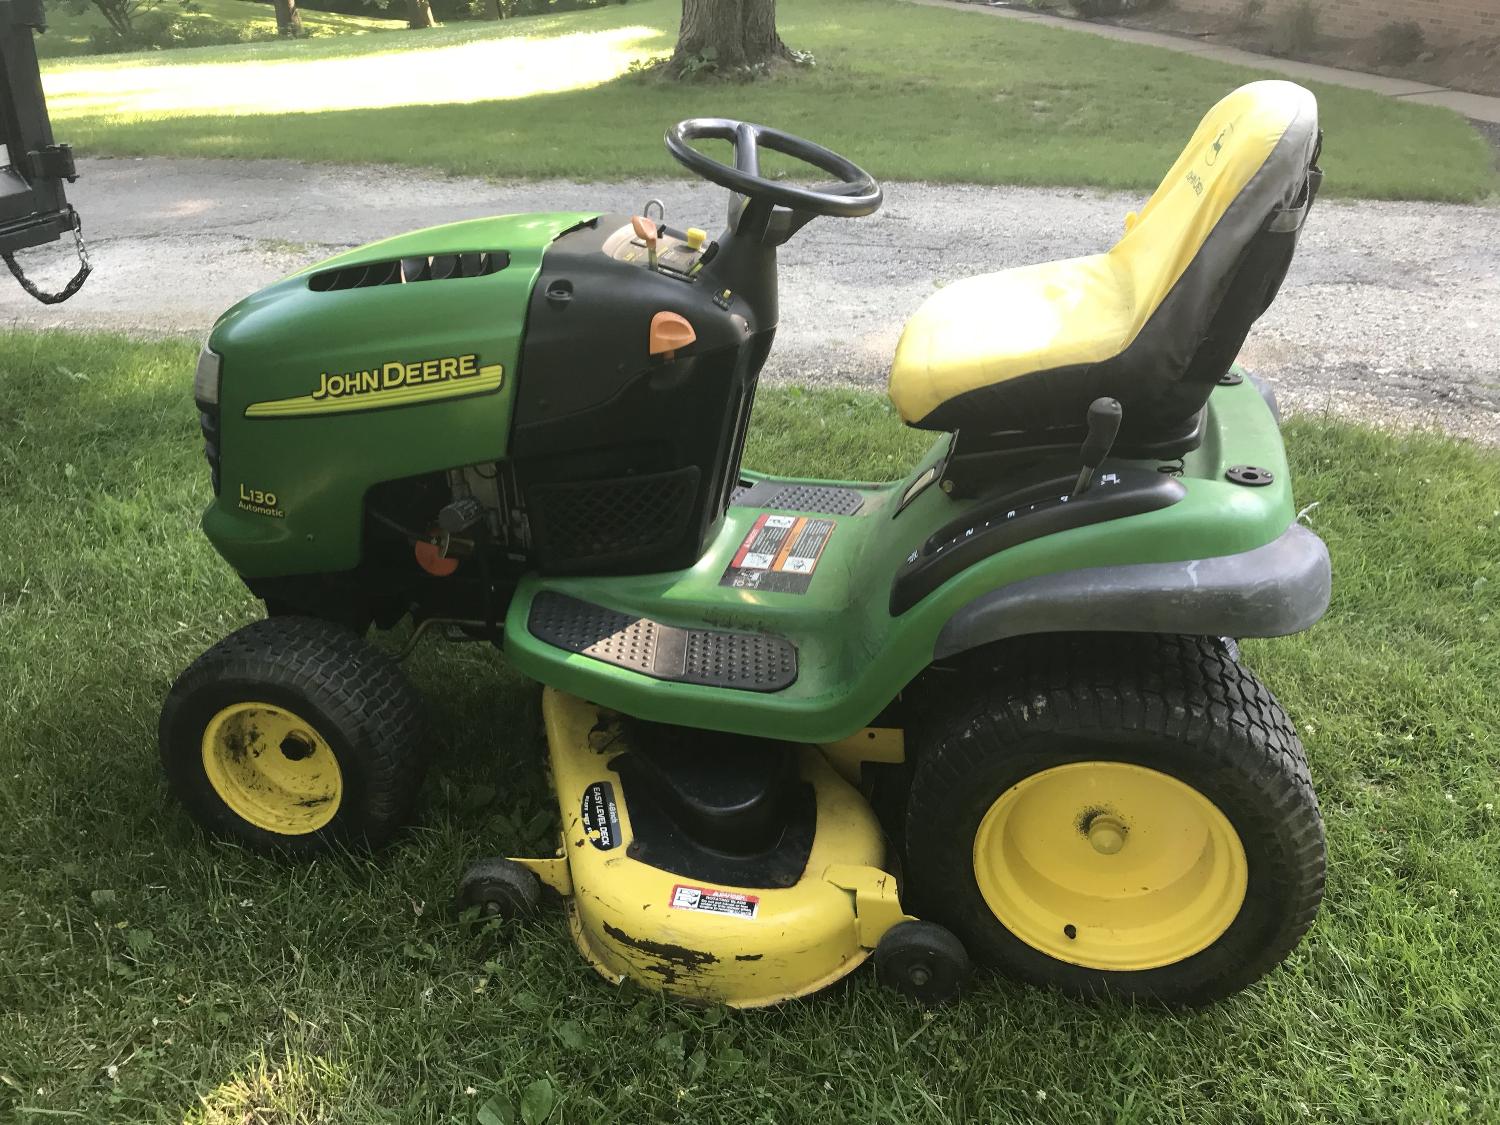 Find more John Deere Lawn Mower for sale at up to 90% off